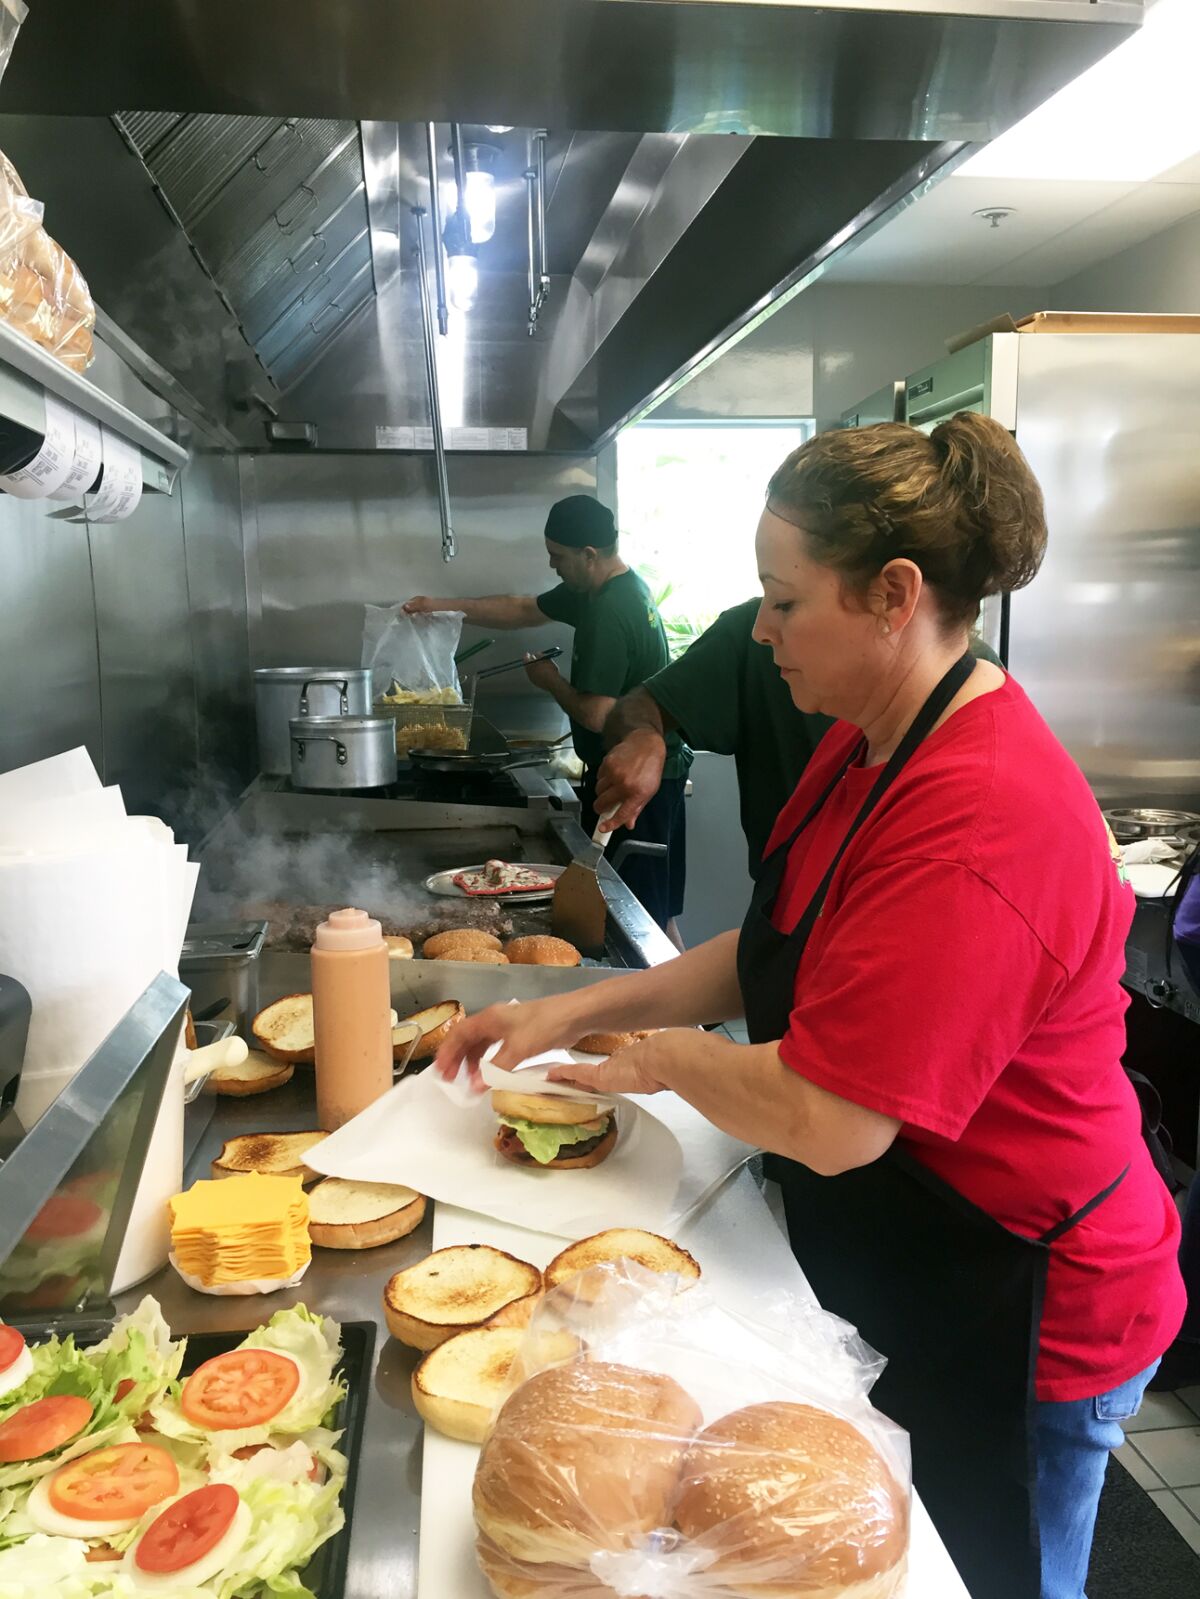 Nessy Burgers manager Rebeca Loera assembles Nessy Burgers at the Fallbrook restaurant, which moved into a permanent location in March after 30 years in an old camping trailer.